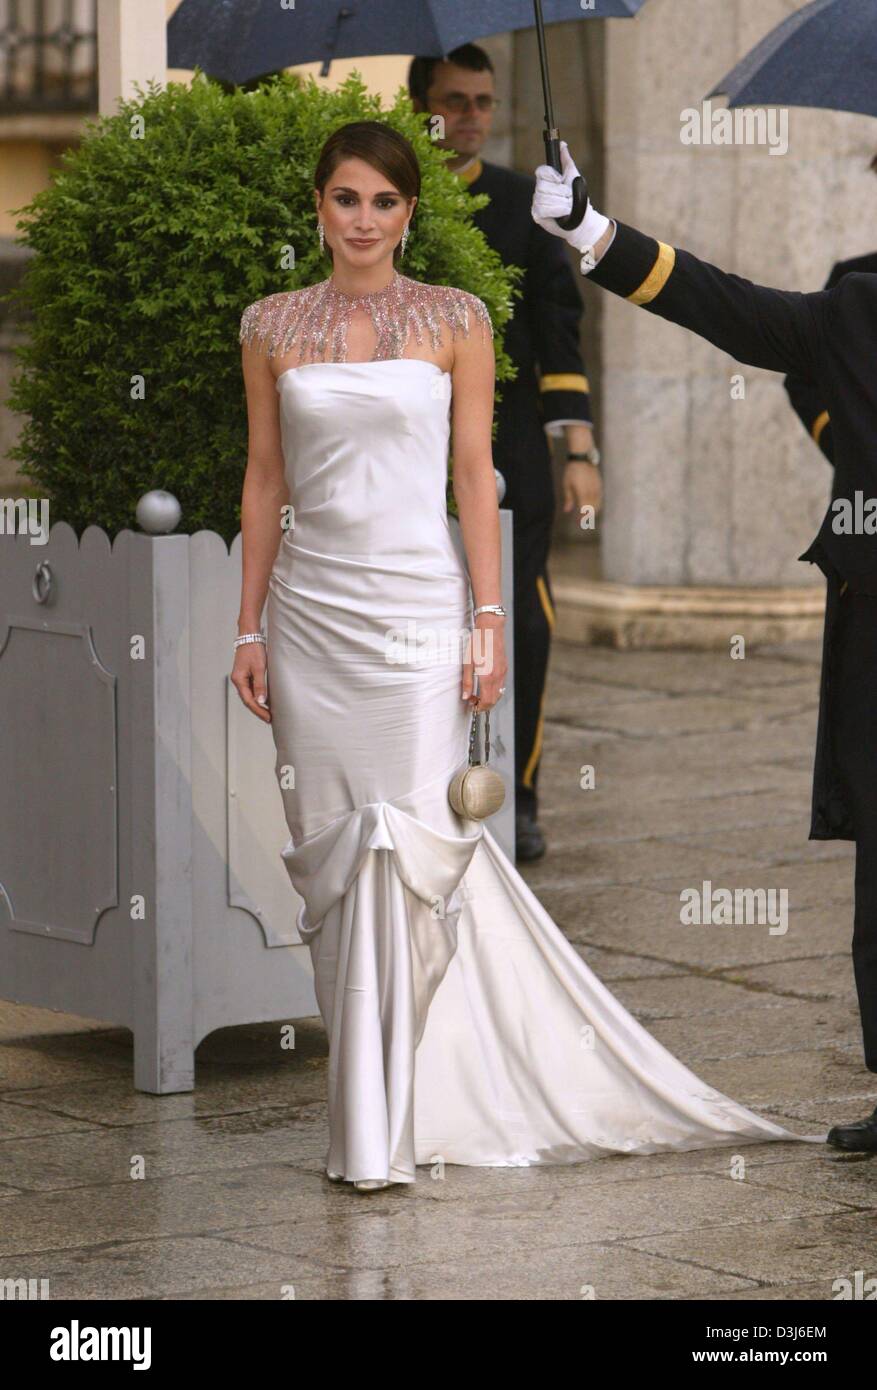 (dpa) - Queen Rania of Jordan arrives at the gala dinner on the eve of the wedding of Spanish crown prince Felipe and Letizia Ortiz  at the Pardo Palace in Madrid, Spain, 21 May 2004. Stock Photo